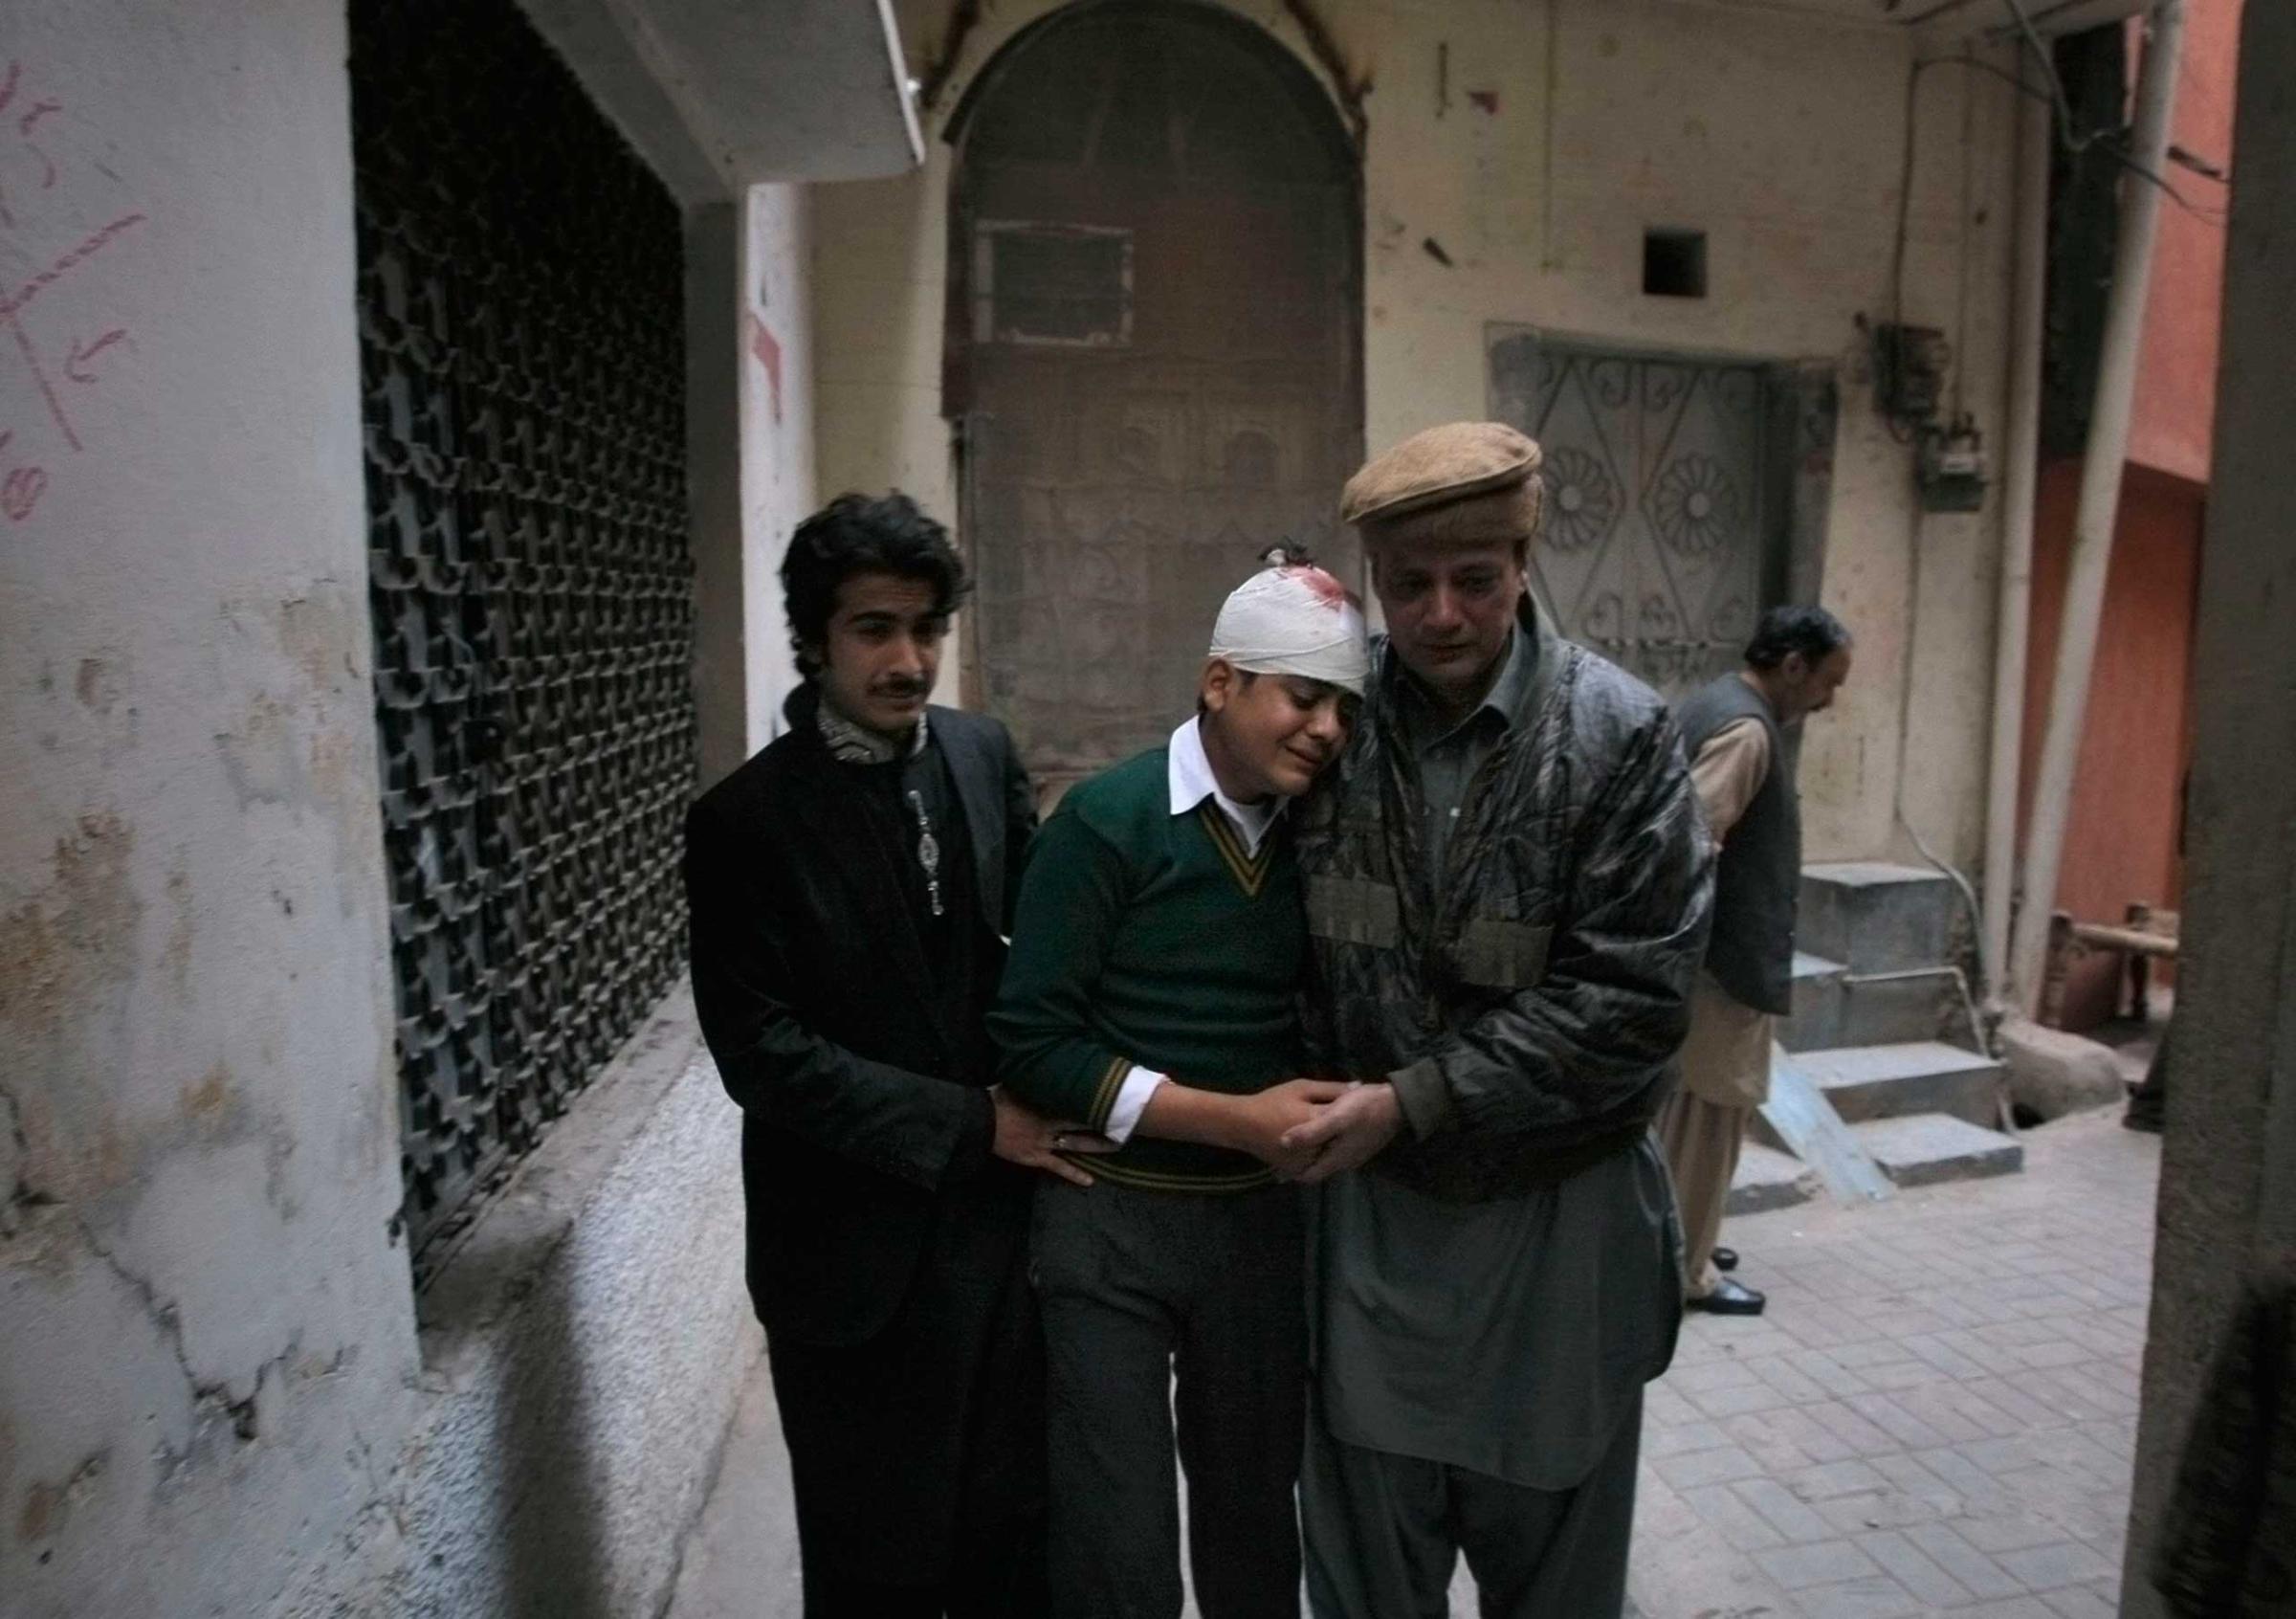 The uncle and cousin of injured student Mohammad Baqair, center, comfort him as he mourns the death of his mother who was a teacher at the school which was attacked by Taliban, in Peshawar, Pakistan, Tuesday, Dec. 16, 2014.